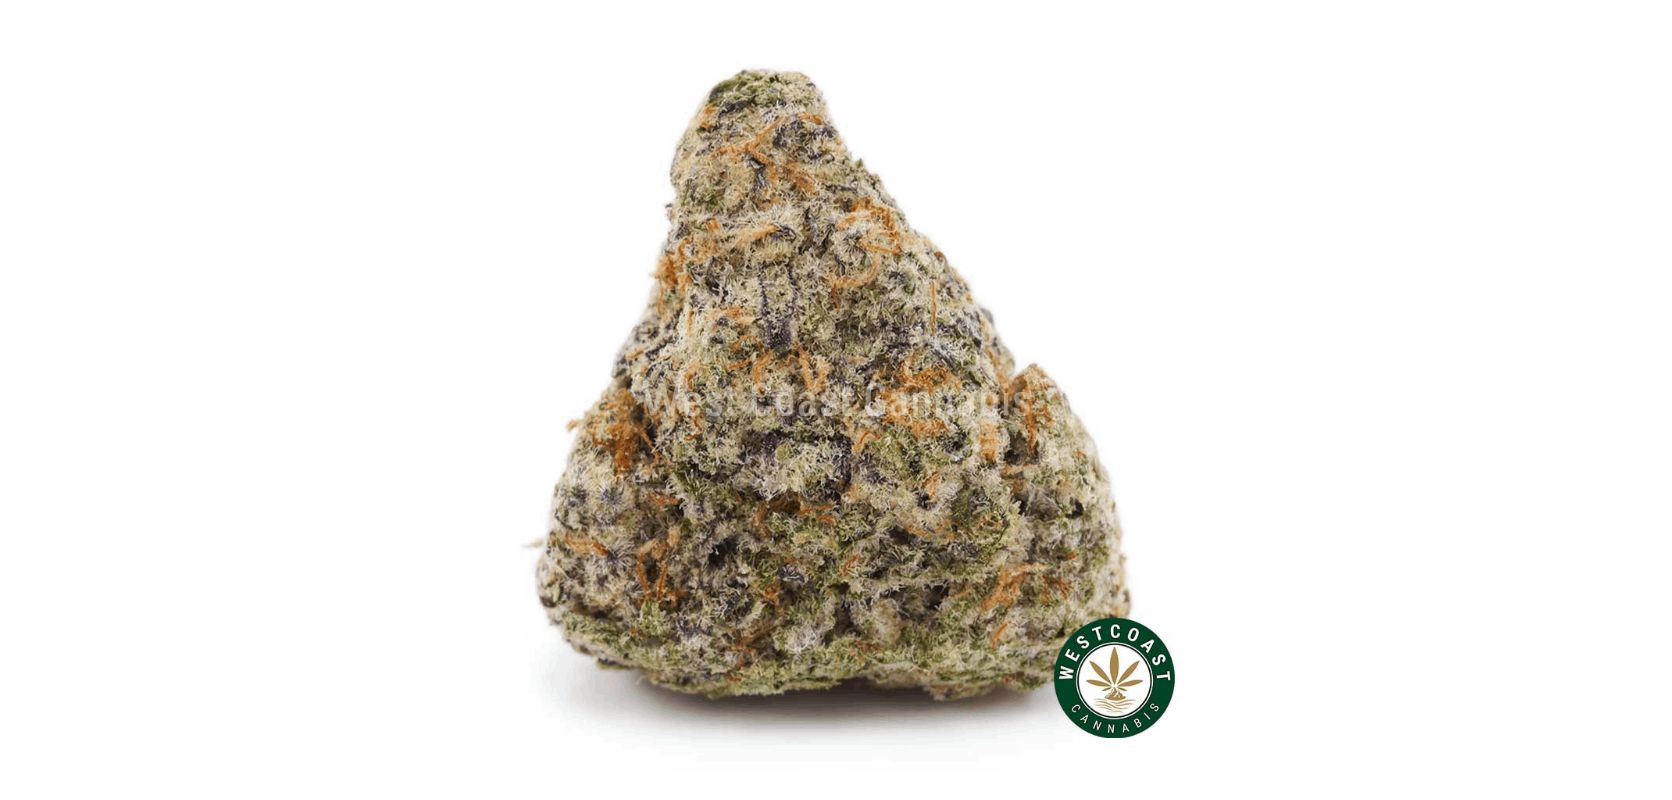 Similar to the Ghost Train Haze, this bud delivers an irresistible and refreshing taste of citrus, immersing you in a world of tangy goodness. 